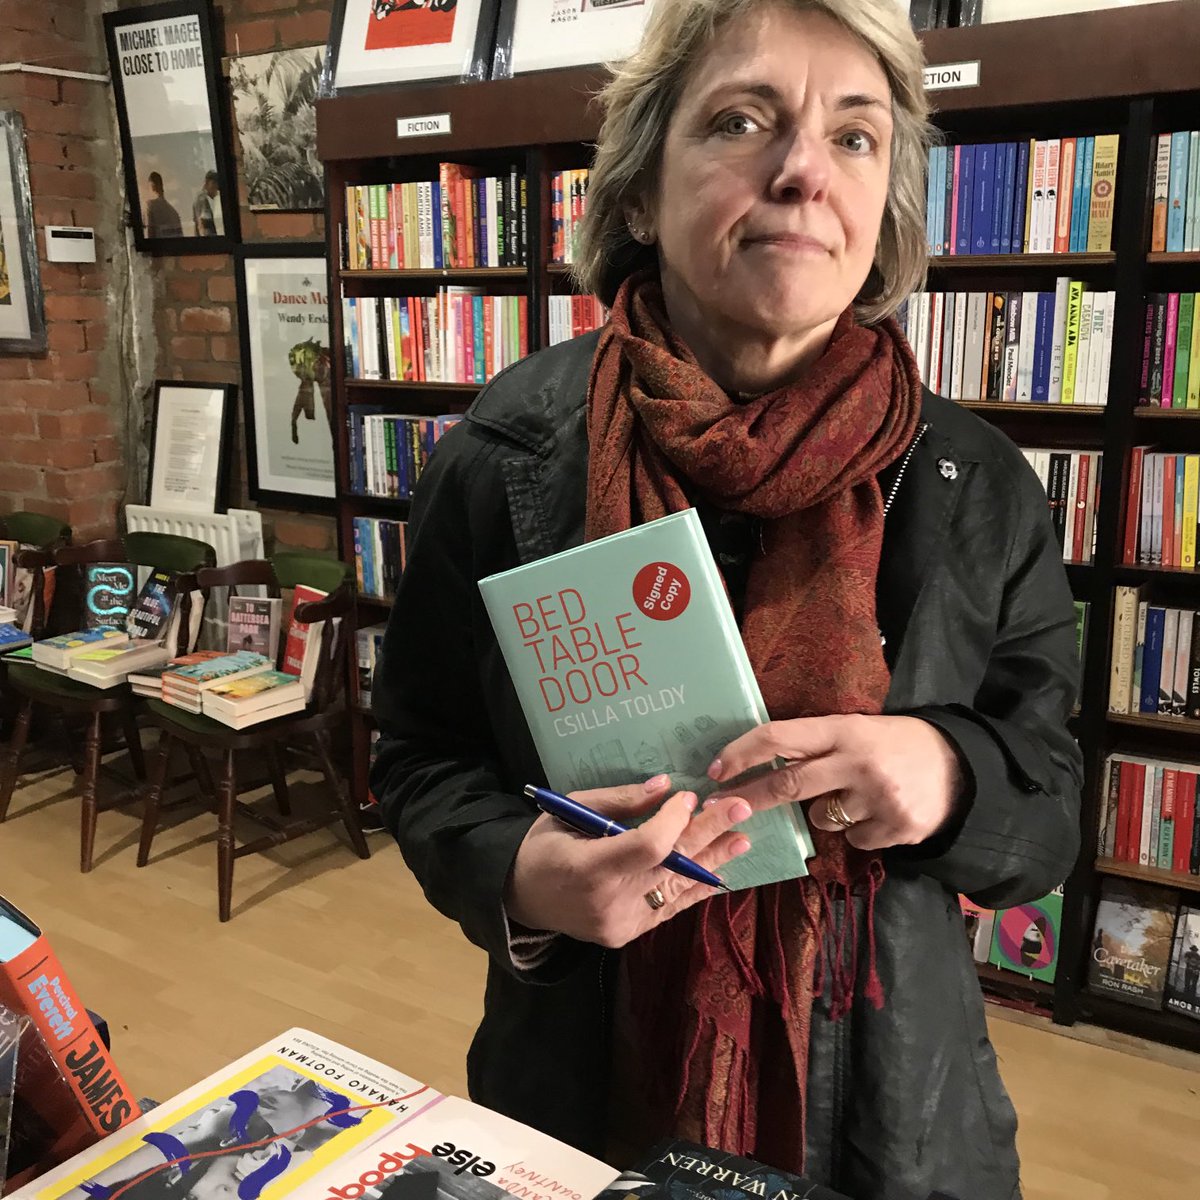 I dropped into ⁦@NOALIBISBOOKS⁩ to sign a few copies of #BedTableDoor, very grateful to the brilliant review by Martin Tyrell in ⁦@fortnight50⁩ edited by ⁦@NiamhyMcNally⁩ ⁦@BoyleMo⁩ ⁦@The_JHS⁩